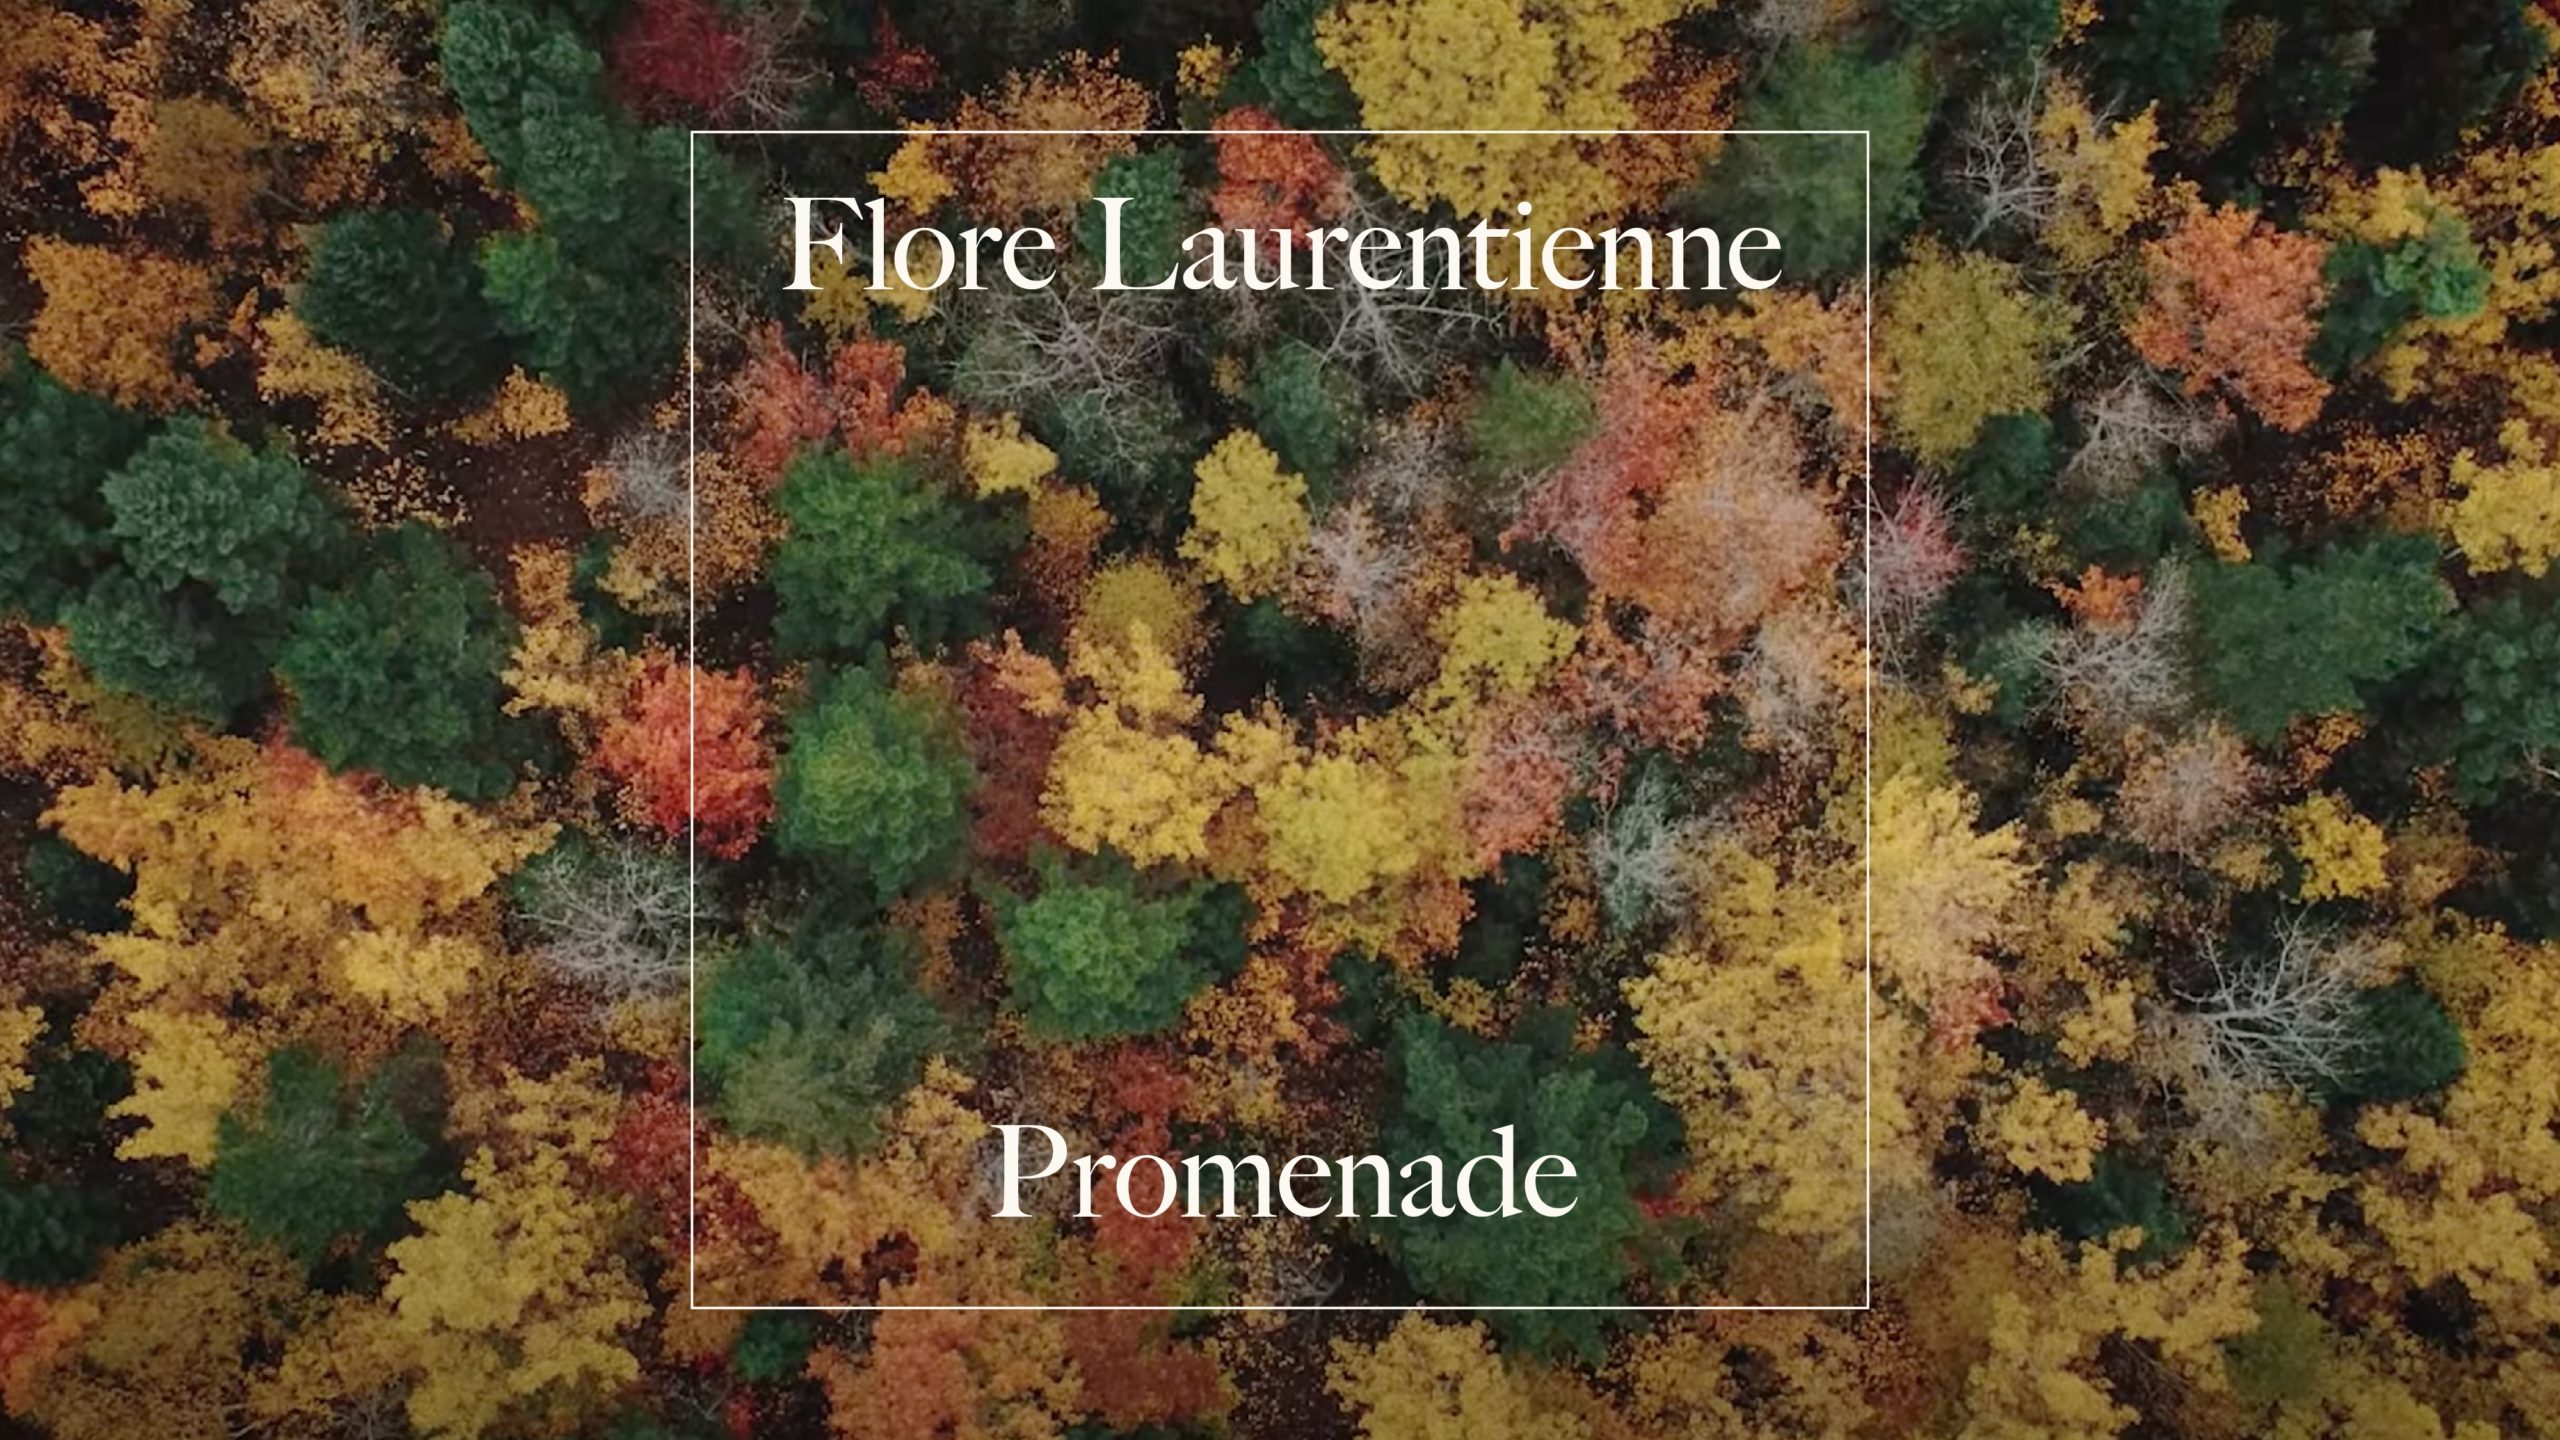 Link to Video for Flore Laurentienne – Promenade (Official Video)